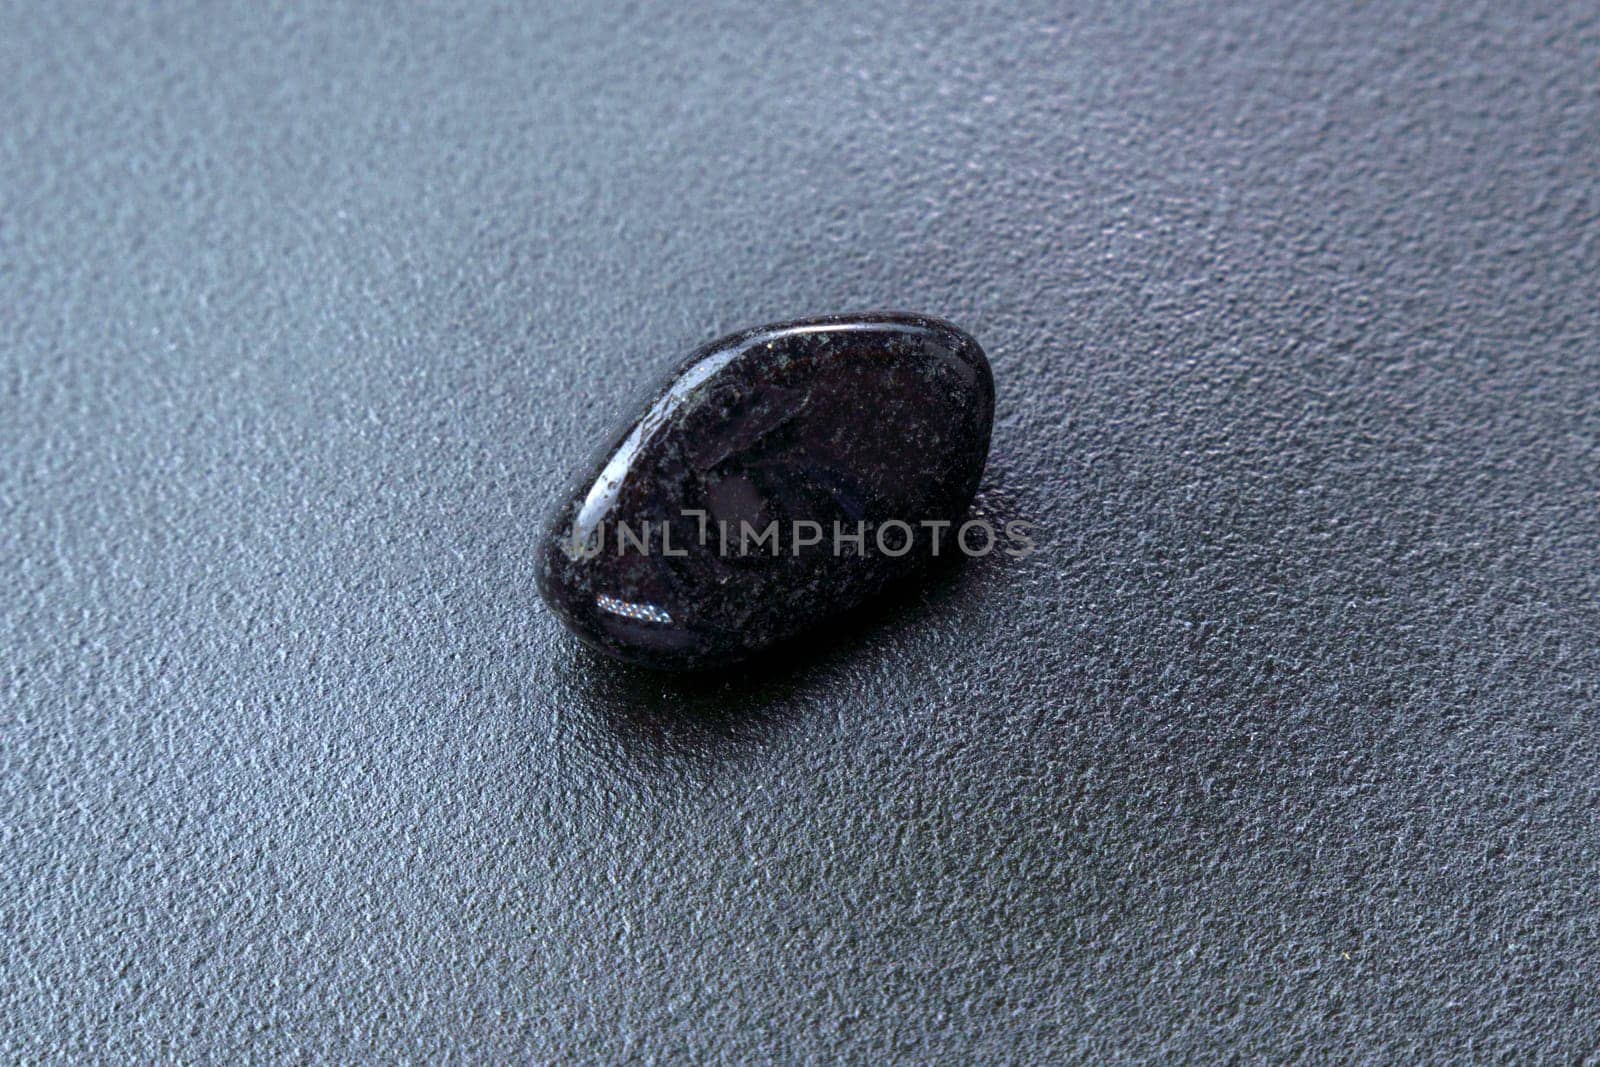 Close up of natural mineral from geological collection tumbled black onyx gem stone, black background by darksoul72